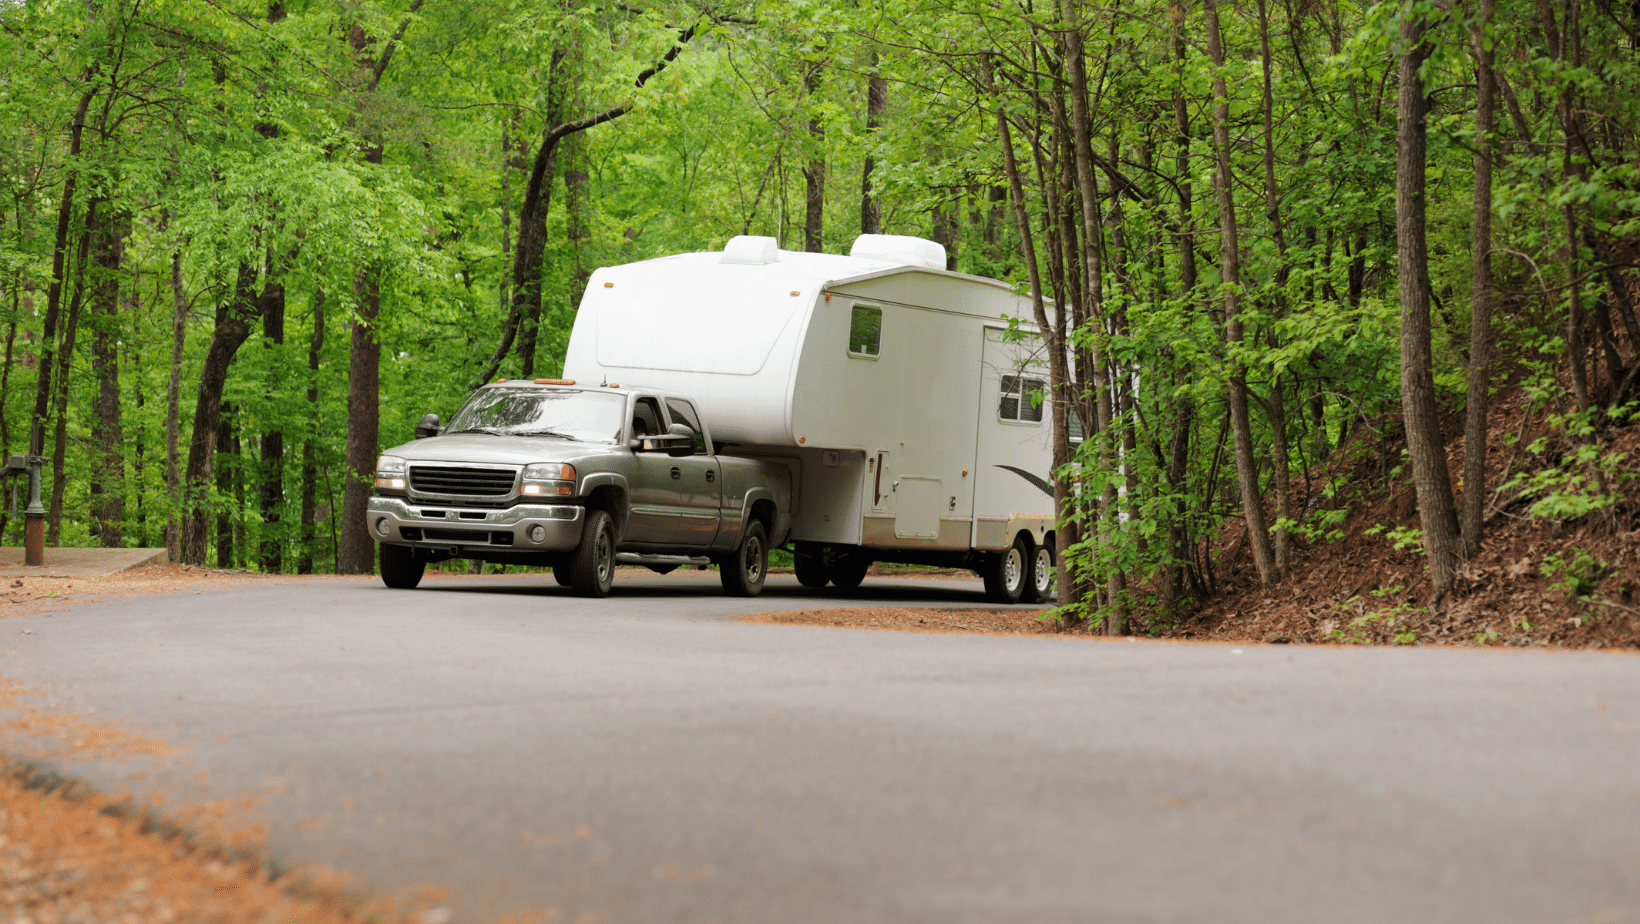 Trailer Talk: 5 Things You Should Know Before You Tow